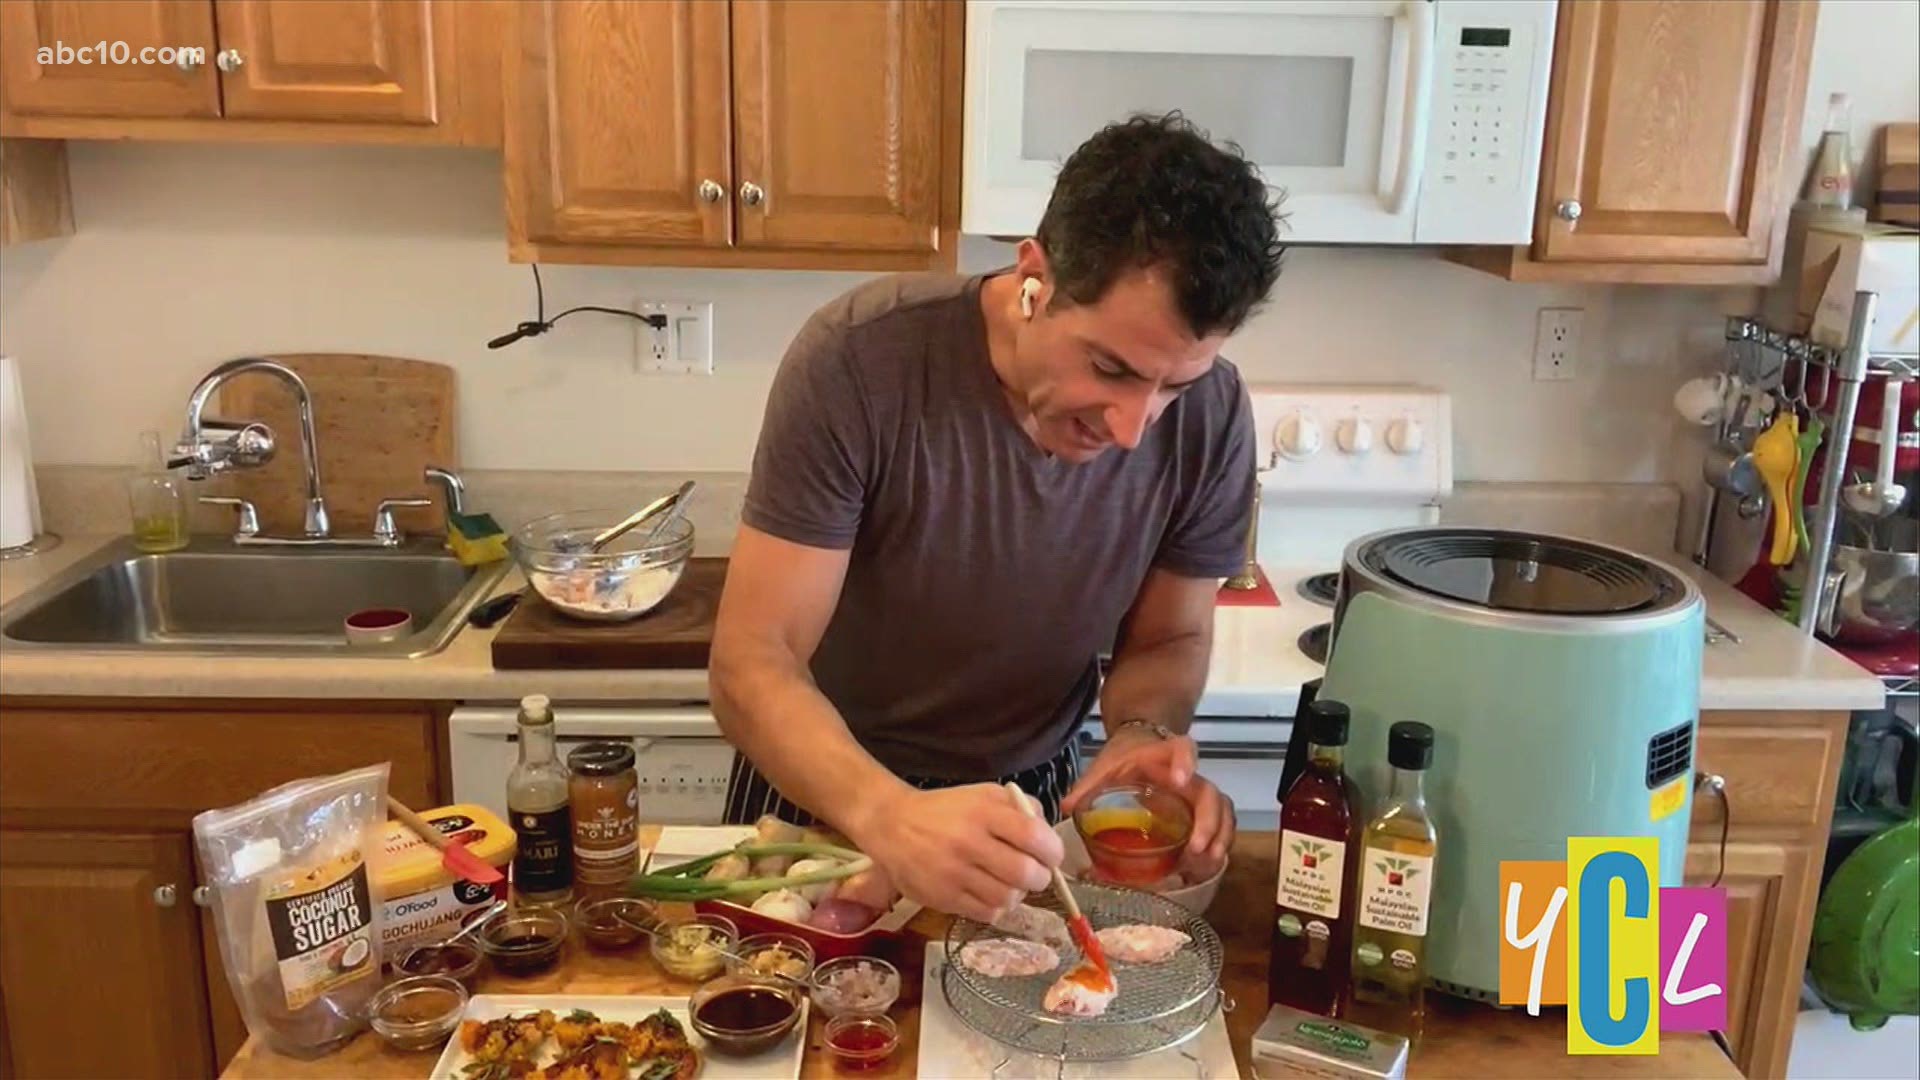 Culinary Expert Chef Girard Viverito shares his summer meal tips and demos his personal recipe for Korean inspired air-fried gluten free chicken wings.